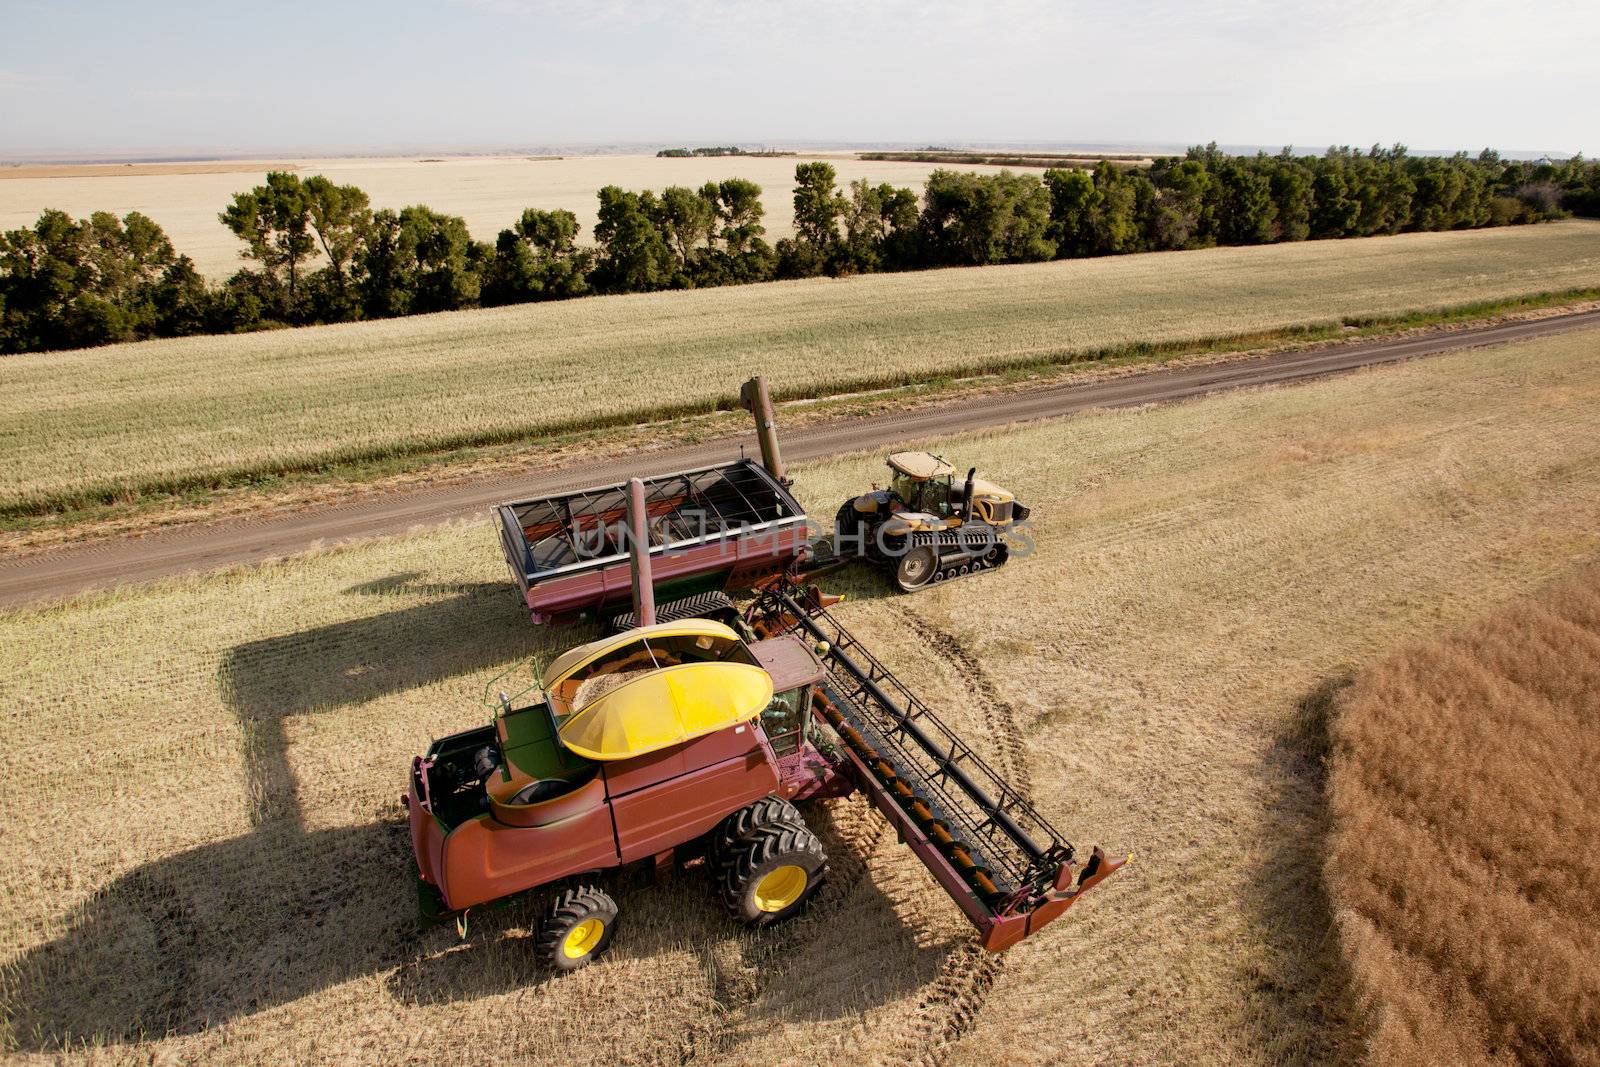 Large combine unloading seed into a grain cart on a prairie field